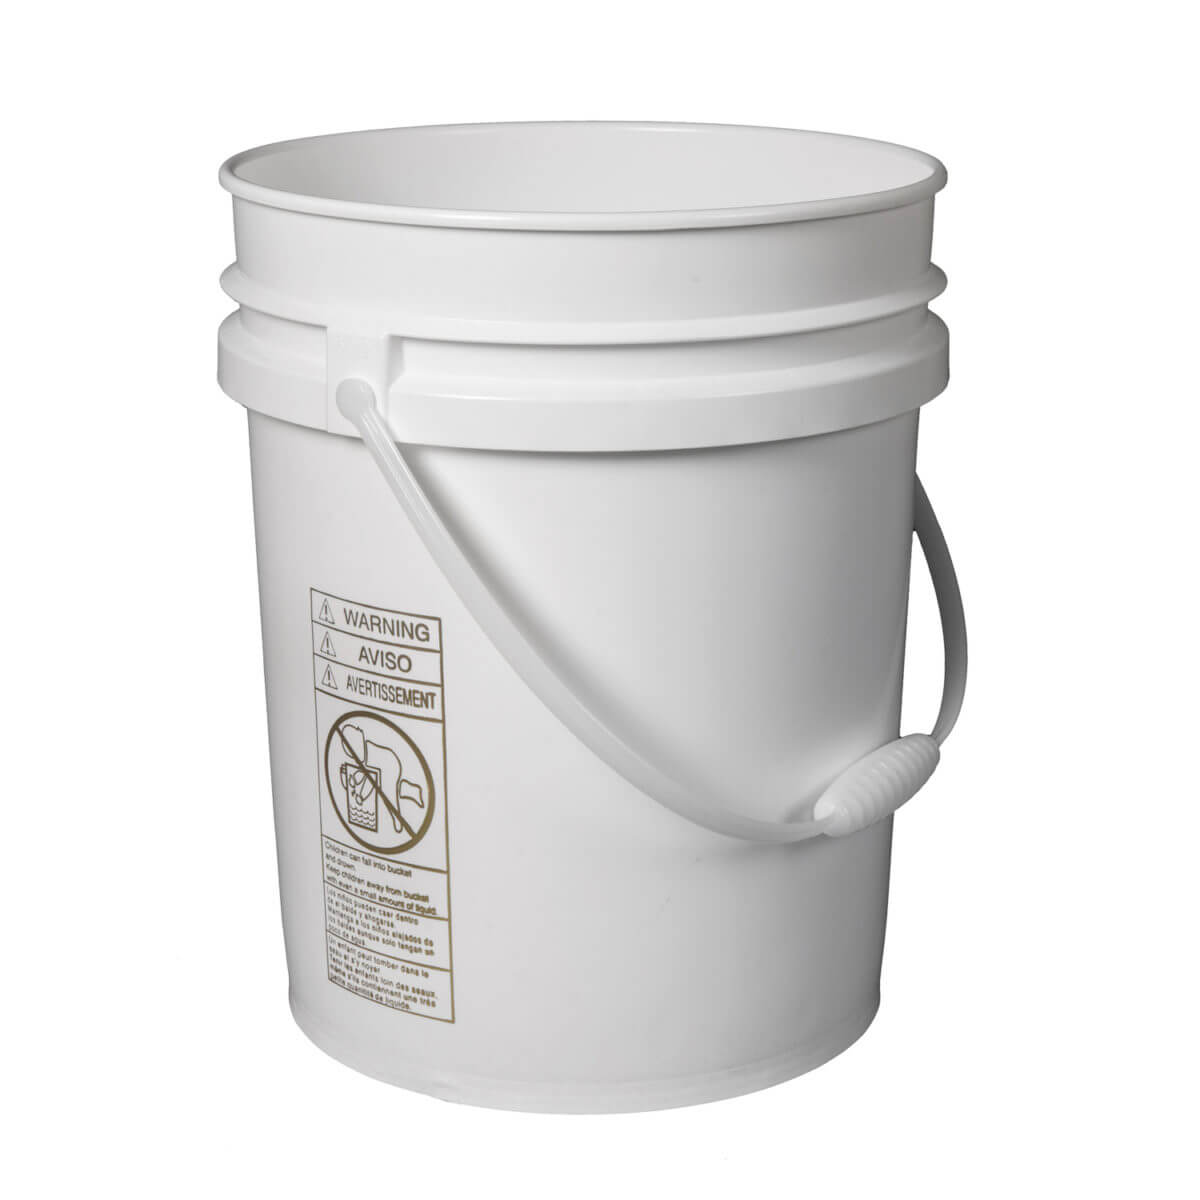 Open-Head Plastic Pails & Buckets - Best Containers